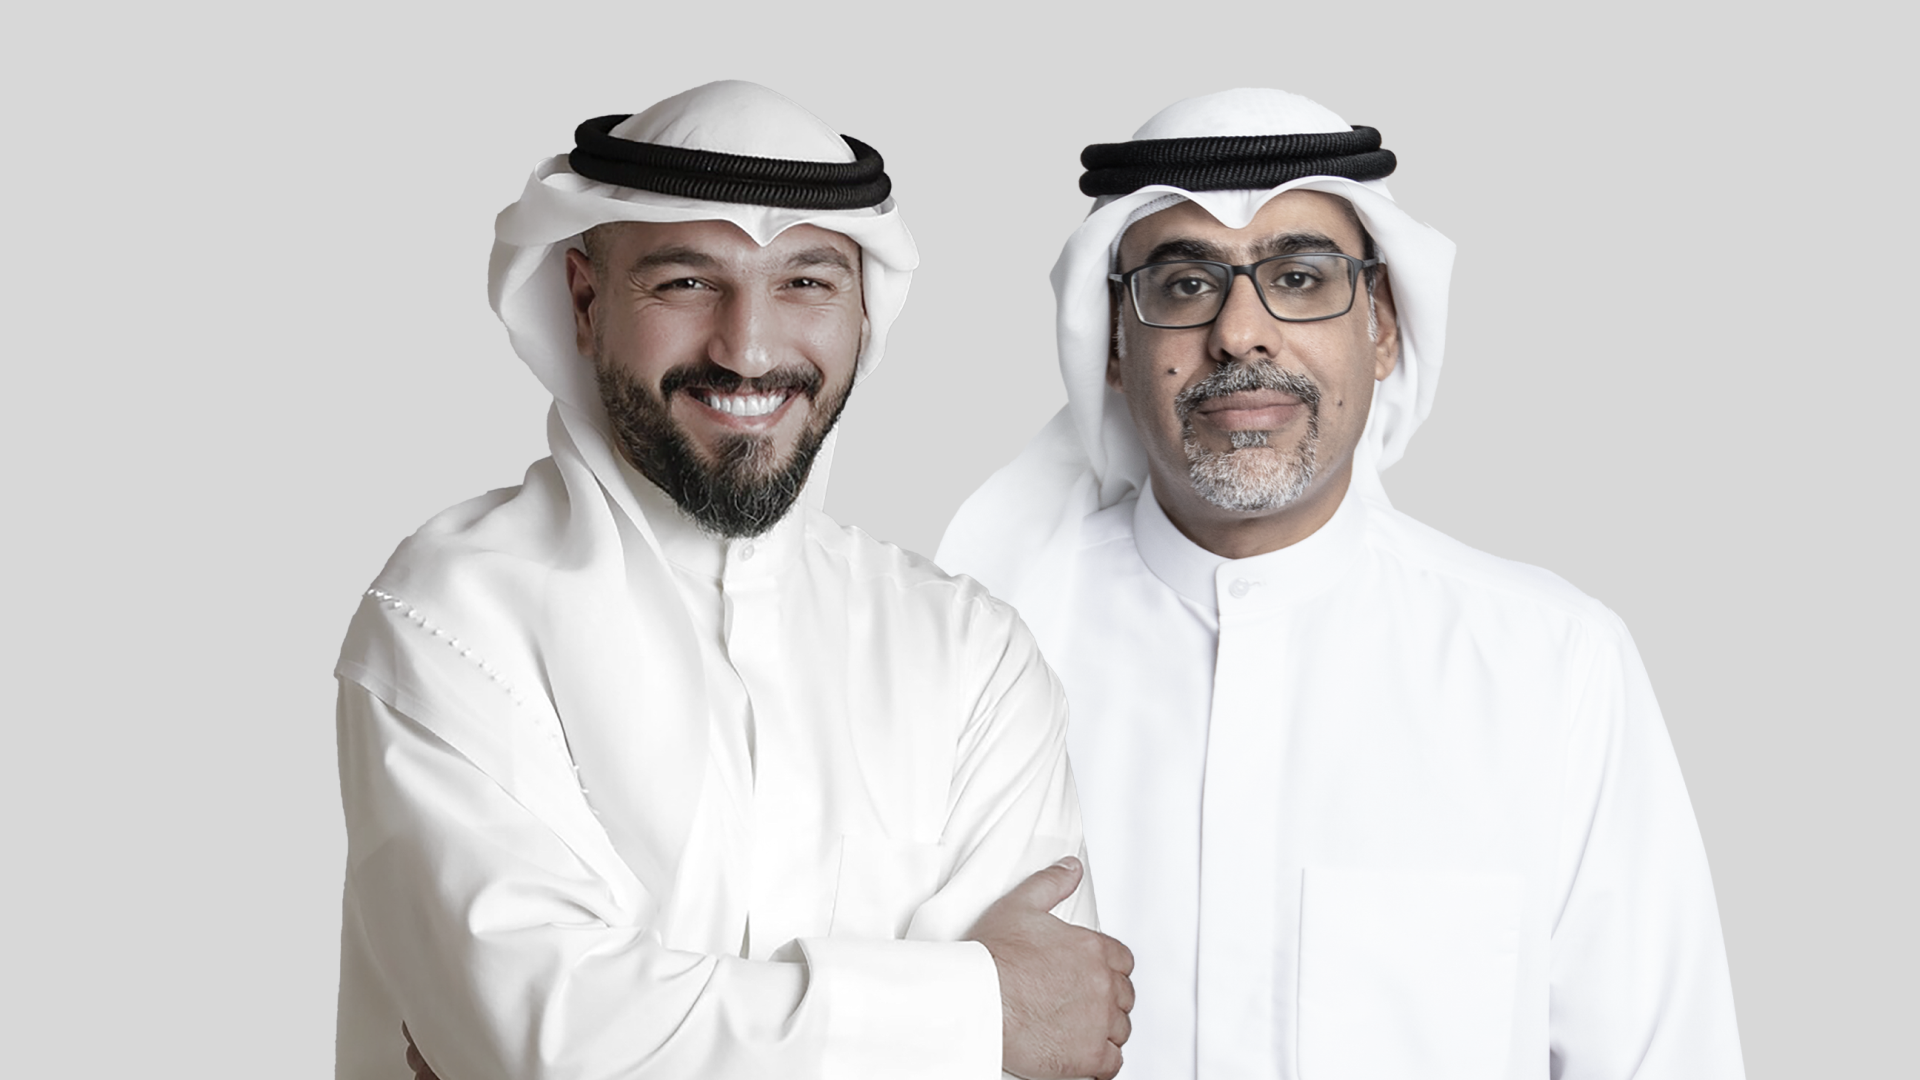 Ali Abulhasan, Co-Founder & CEO of Tap Payments, Ahmed AlMunayes, Managing Director of Tap Payments, Qatar